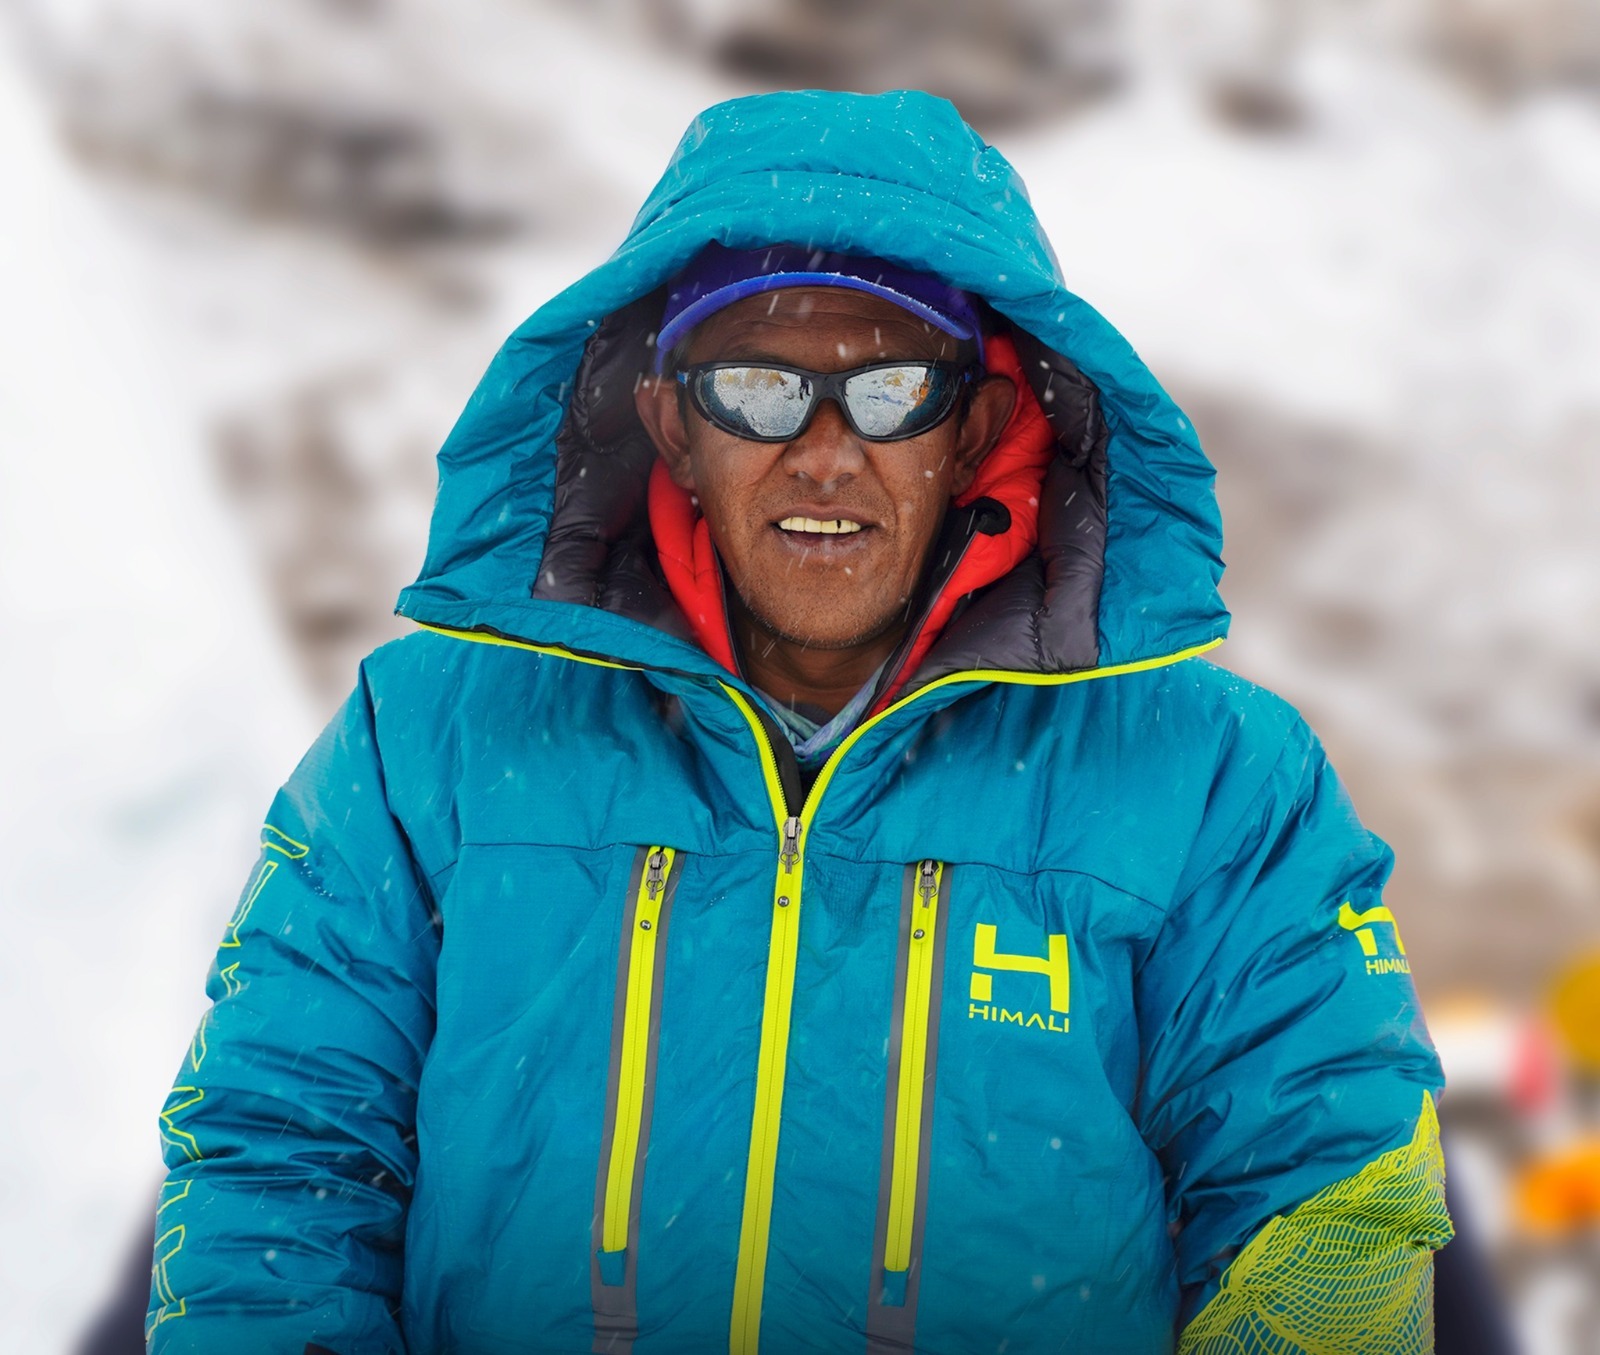 Pasang Dawa Sherpa equalizes record of most ascents of Everest with Kami Rita Sherpa